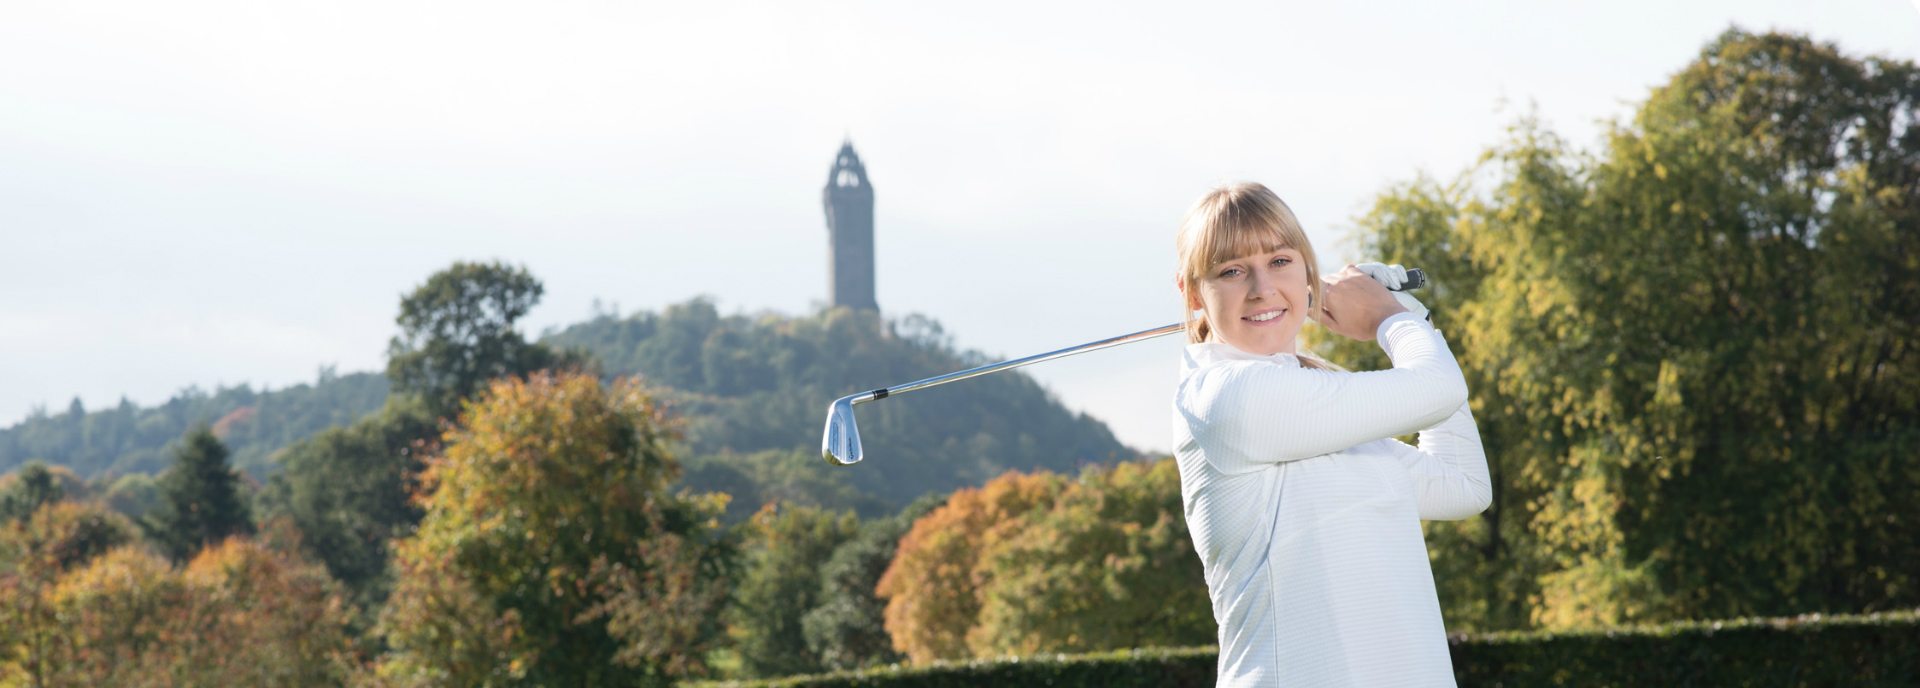 Nicola Slater swinging a golf club with Wallace Monument in background